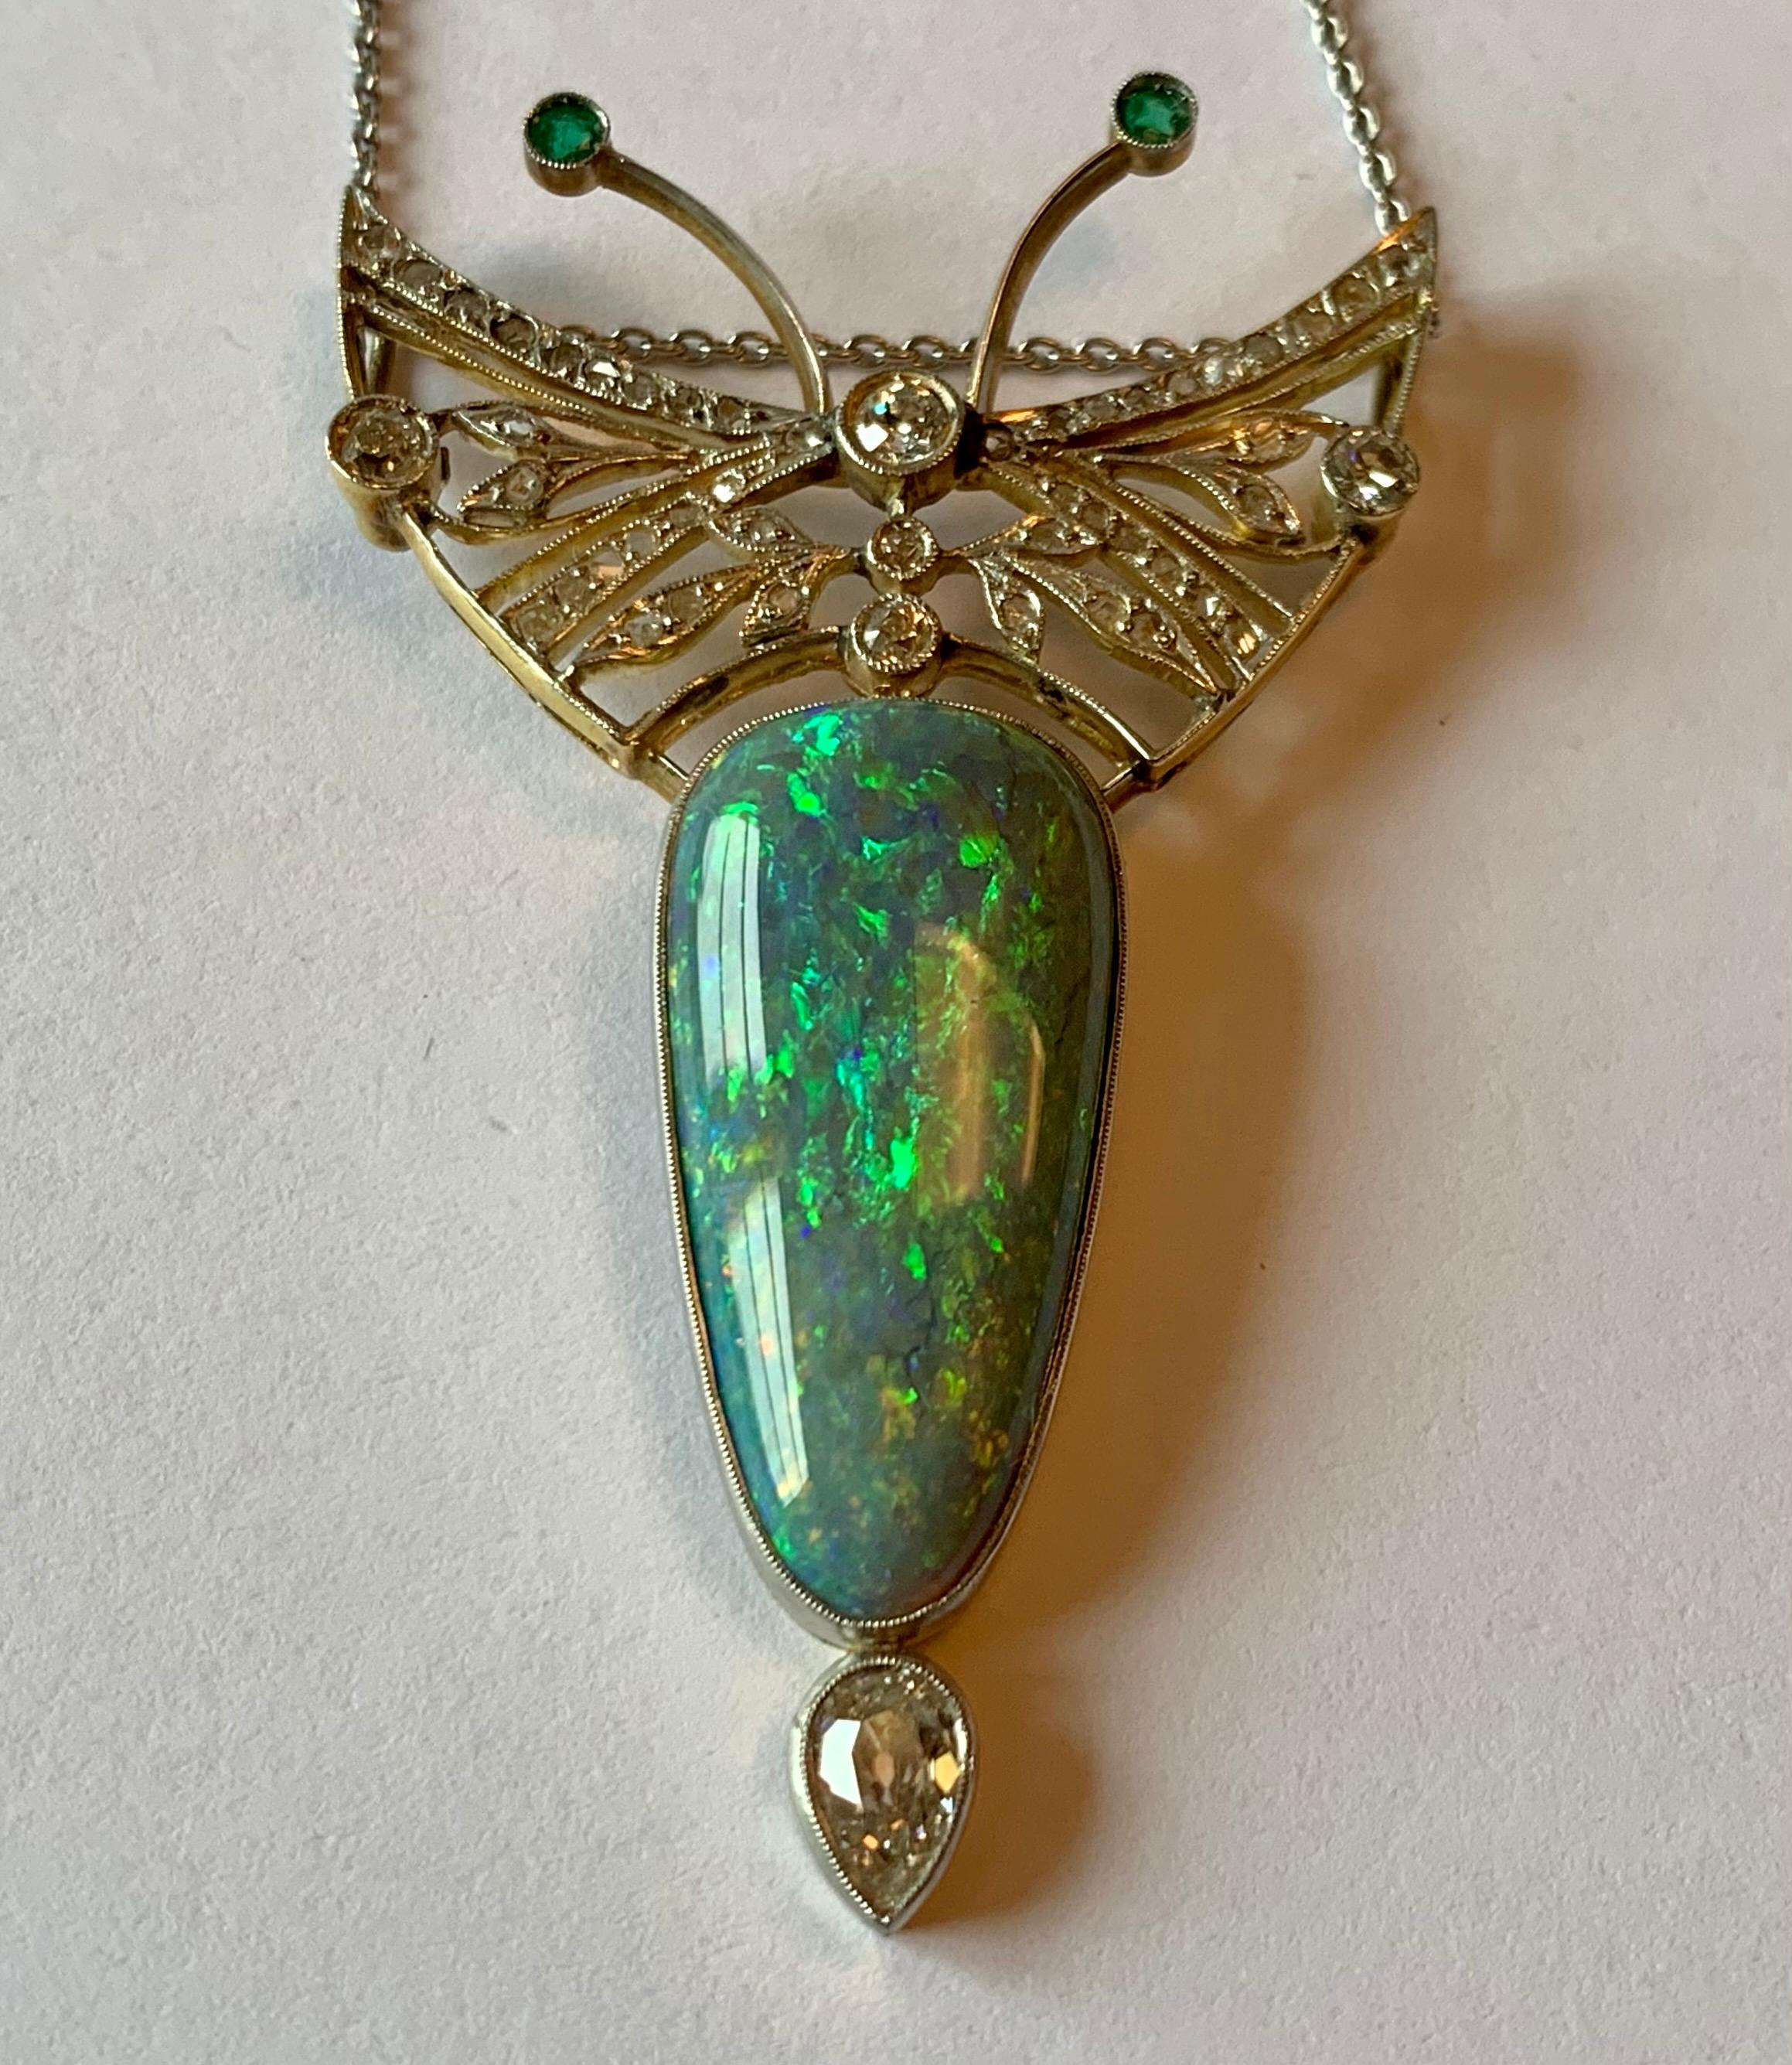 Breathtaking Opal Diamond and Emerald  Butterfly pendant with chain in Platinum and yellow Gold. Set with an Opal 2.5 cm x 1.3 cm with a nice play of color, 1 park shaped Diamonds ca. 0.40 ct, 48 brilliant cut Diamonds ca. 0.70 ct and 2 tiny emerald